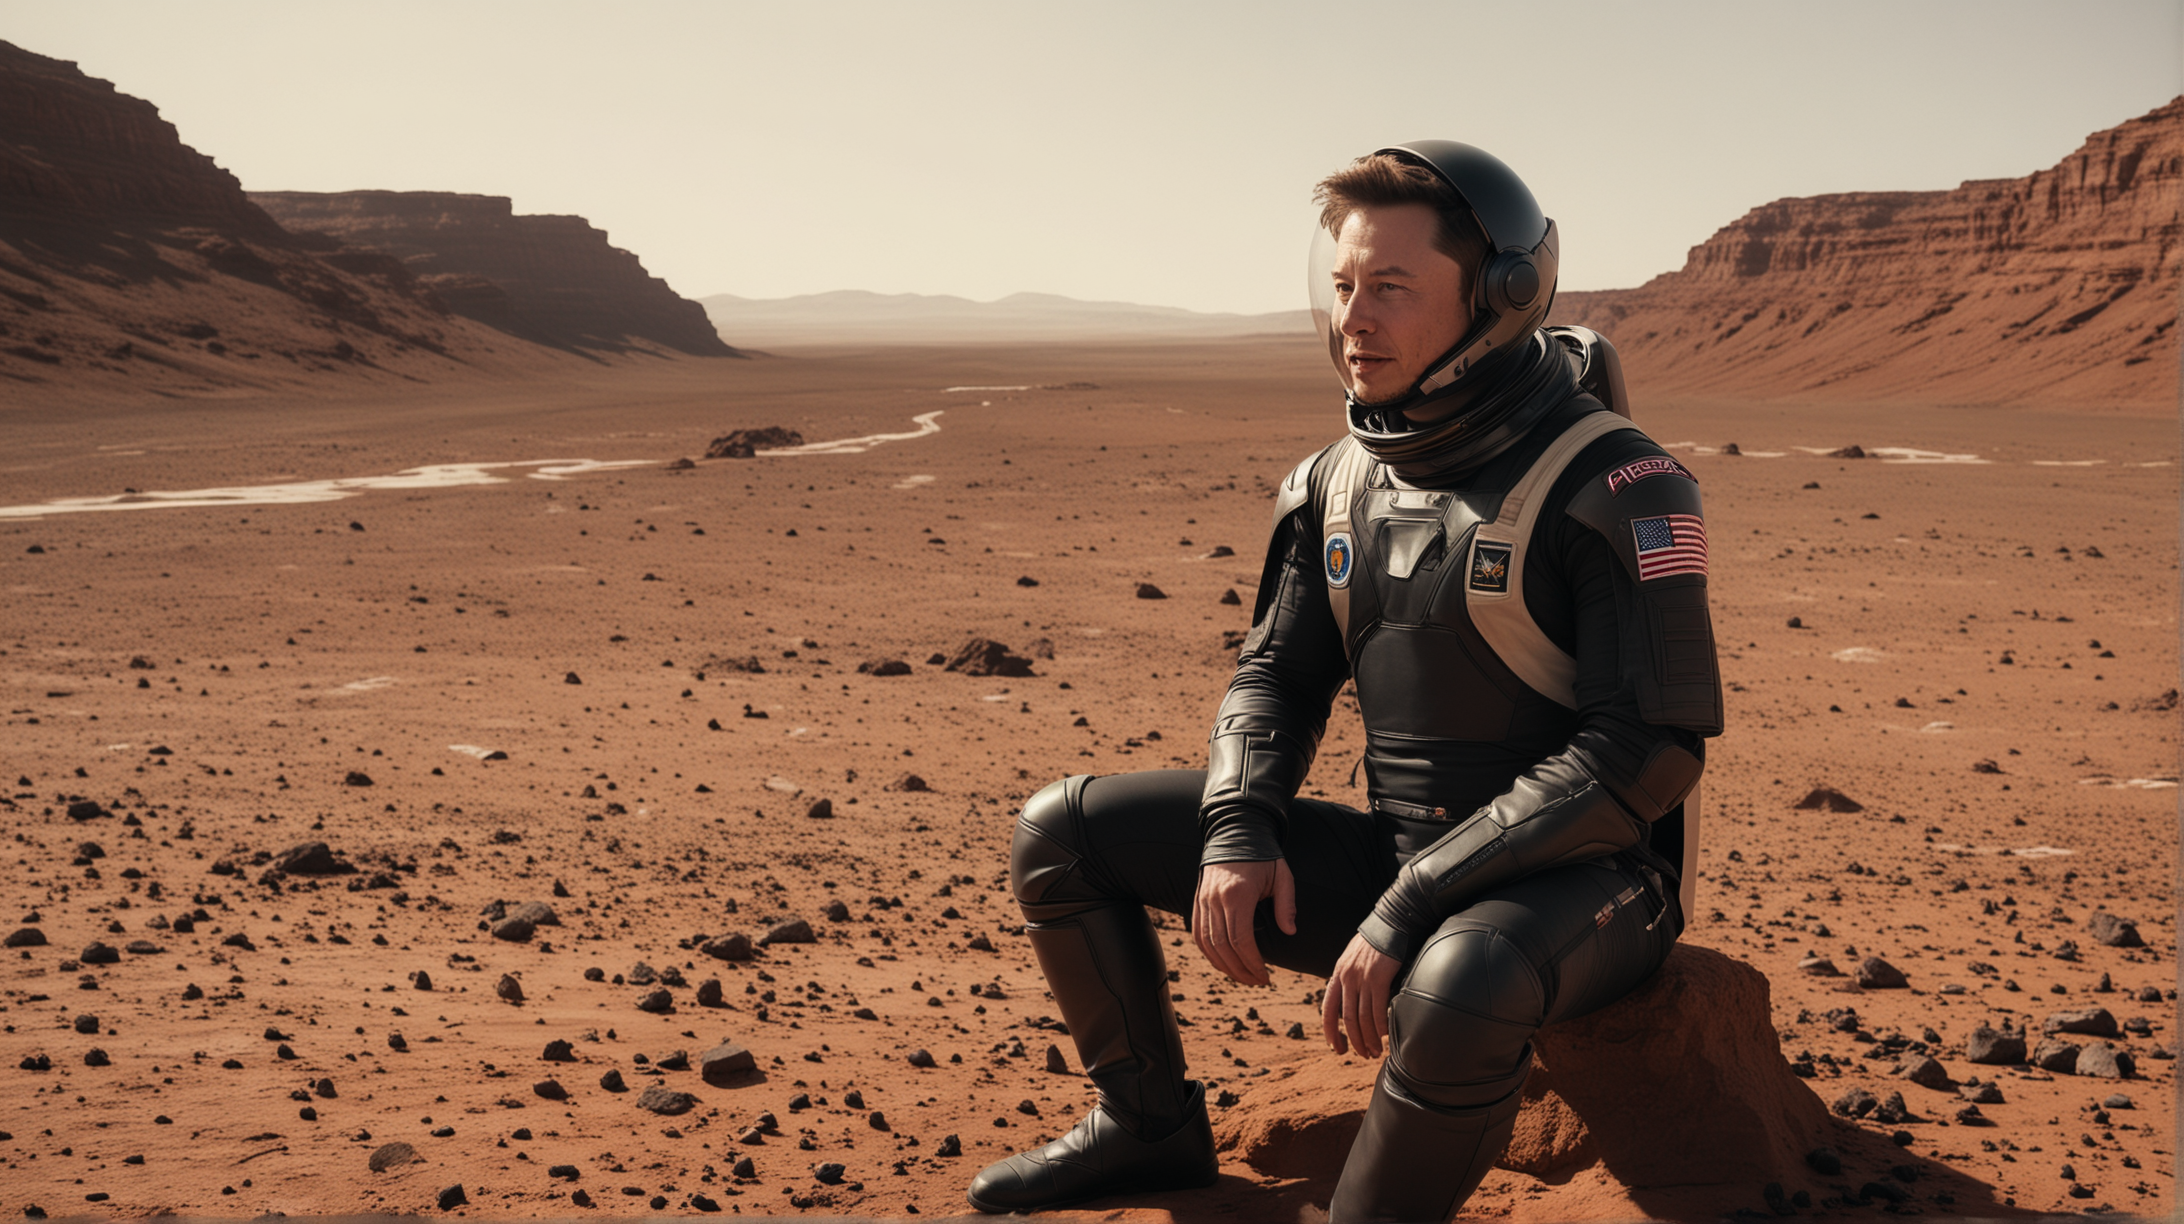 Elon Musk Alone on Mars in Business Suit and Astronaut Helmet